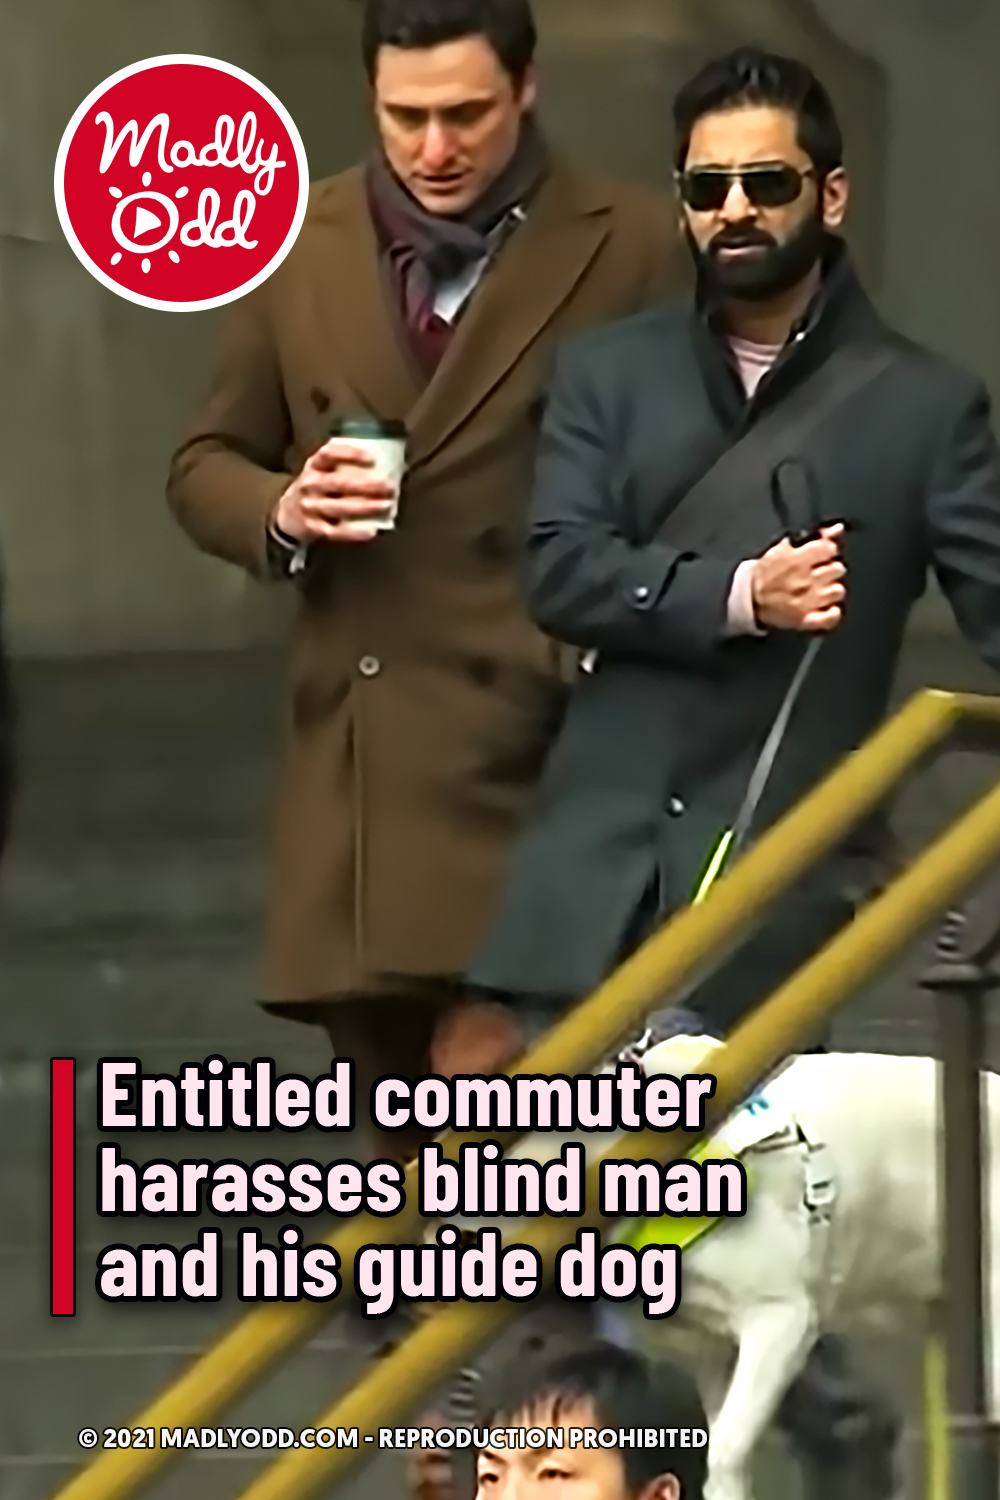 Entitled commuter harasses blind man and his guide dog